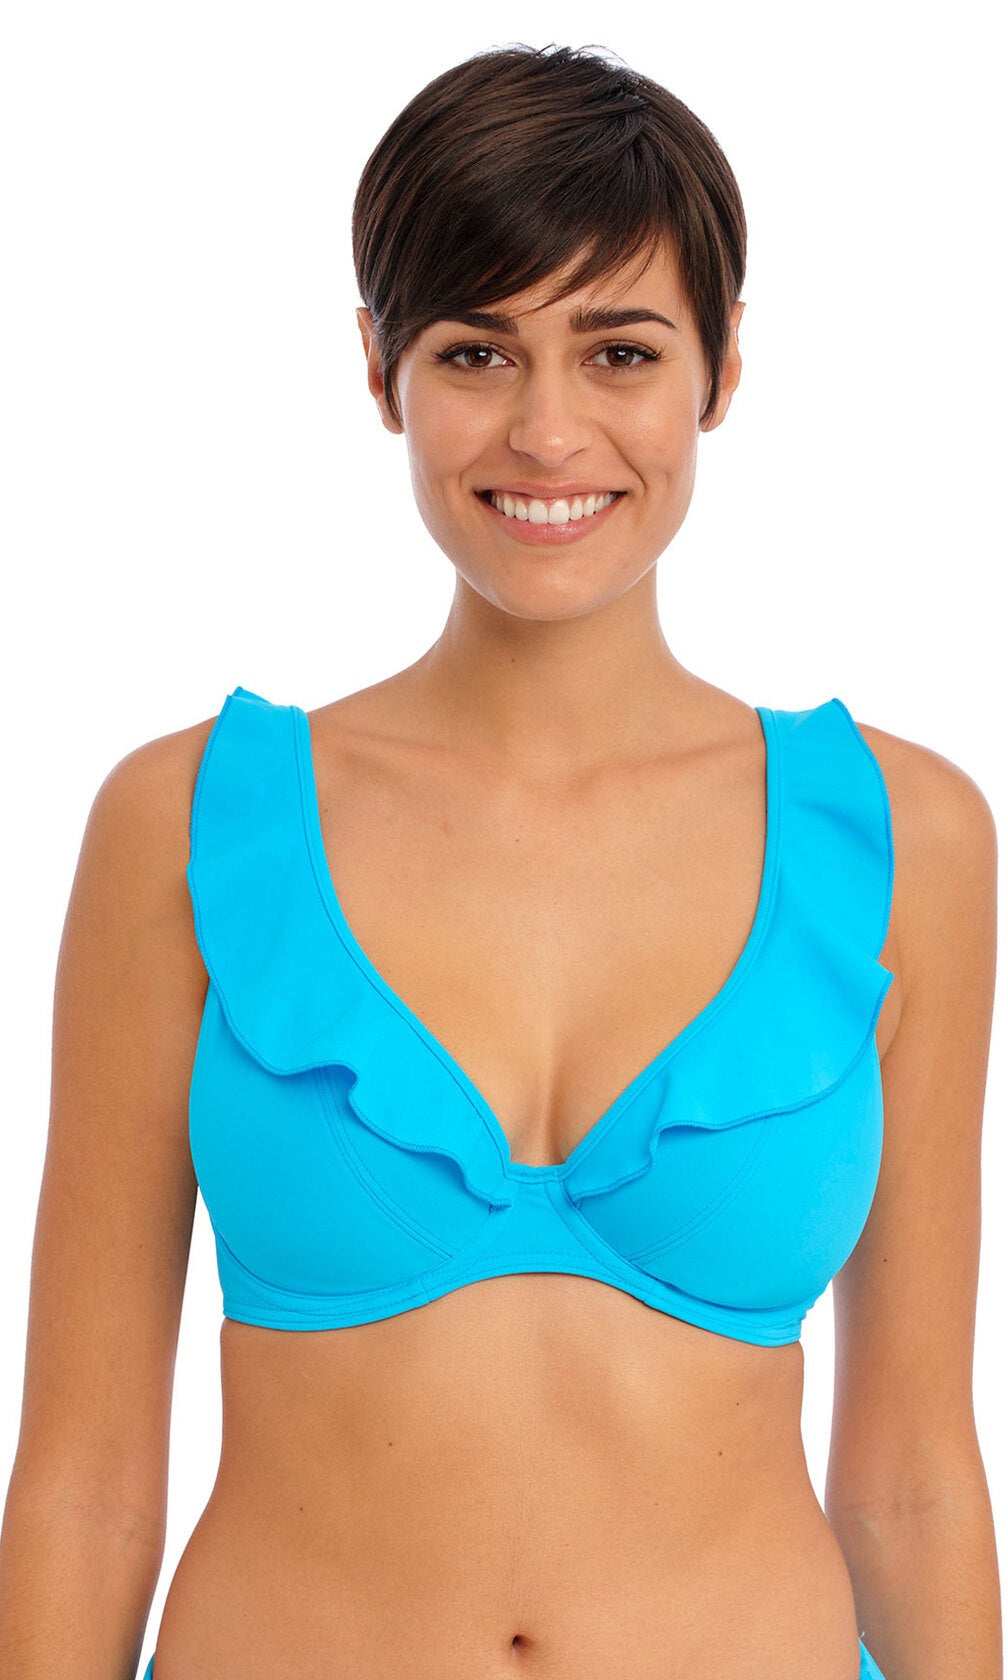 Jewel Cove Plain Turquoise UW High Apex Bikini Top, Special Order D Cup to J Cup